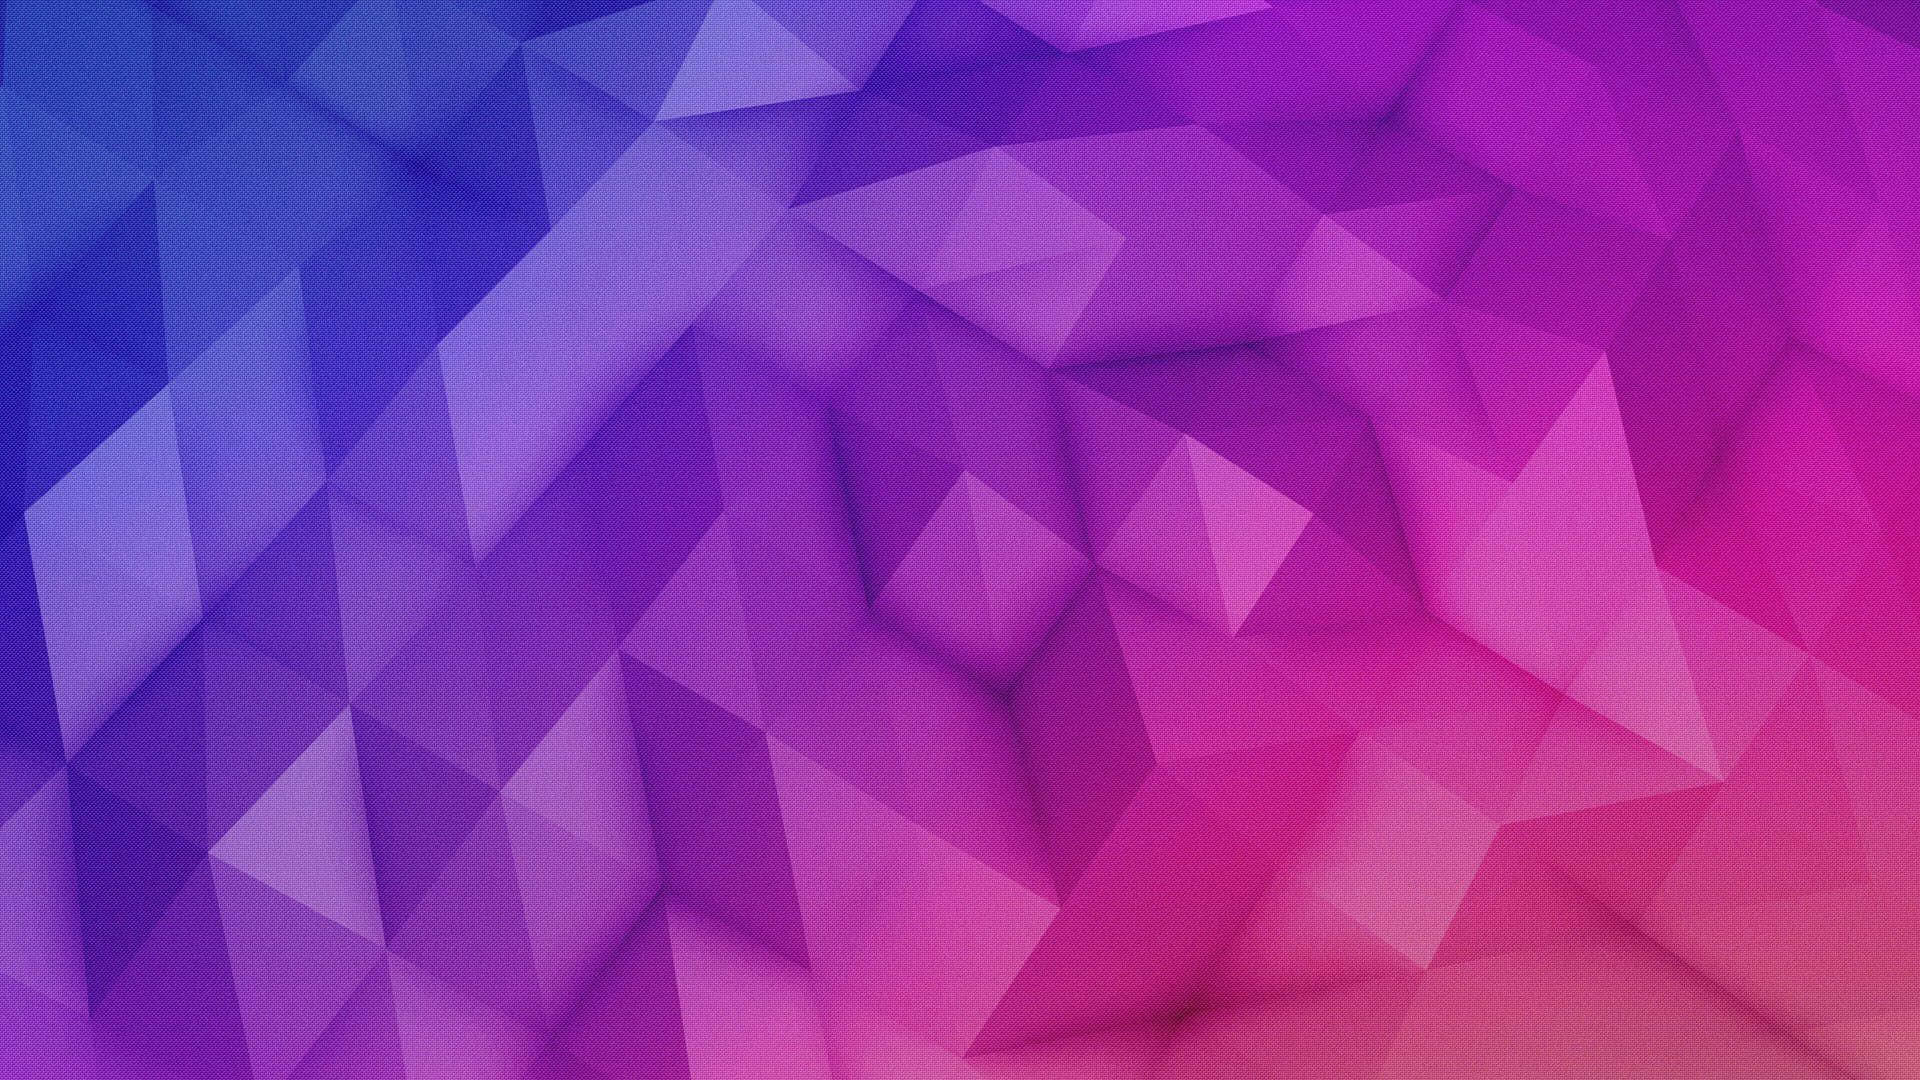 An abstract illustration of a minimalist purple background Wallpaper